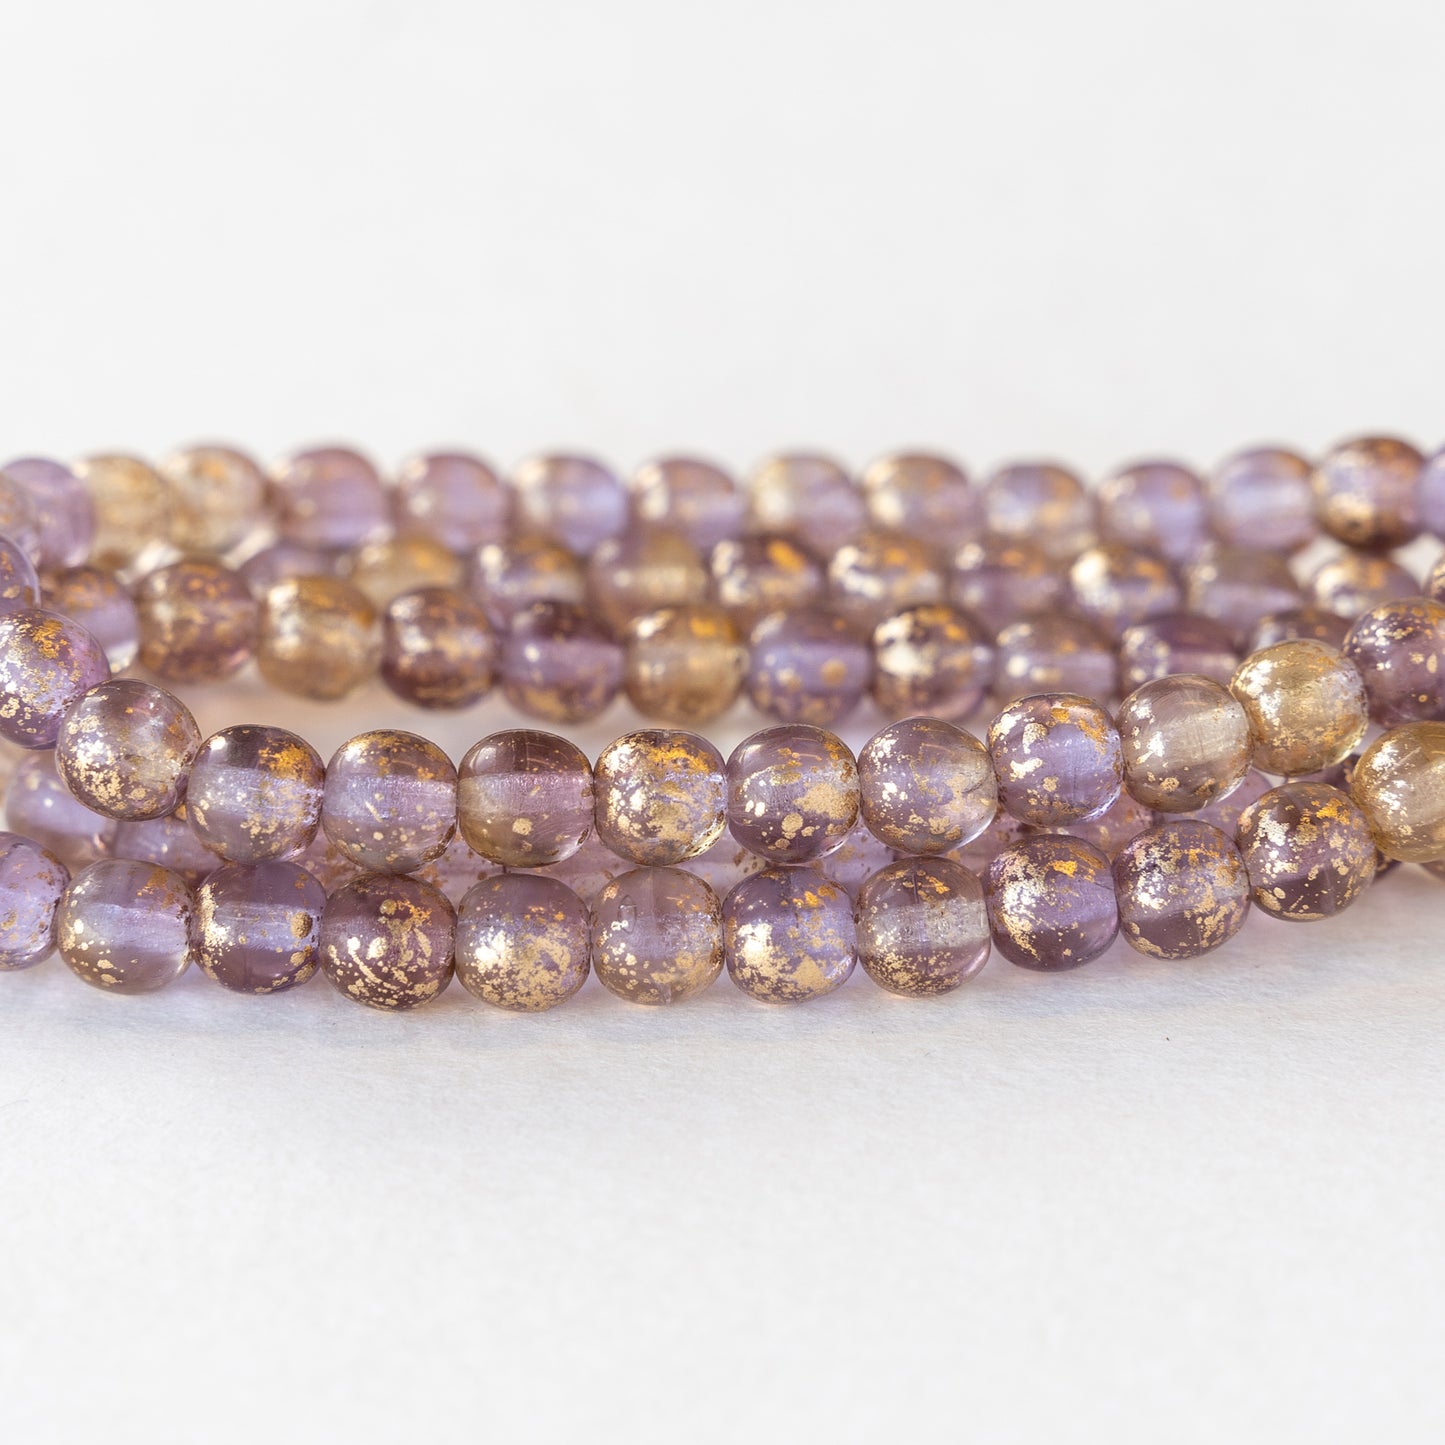 6mm Round Glass Beads - Lavender with Gold Dust - 30 Beads